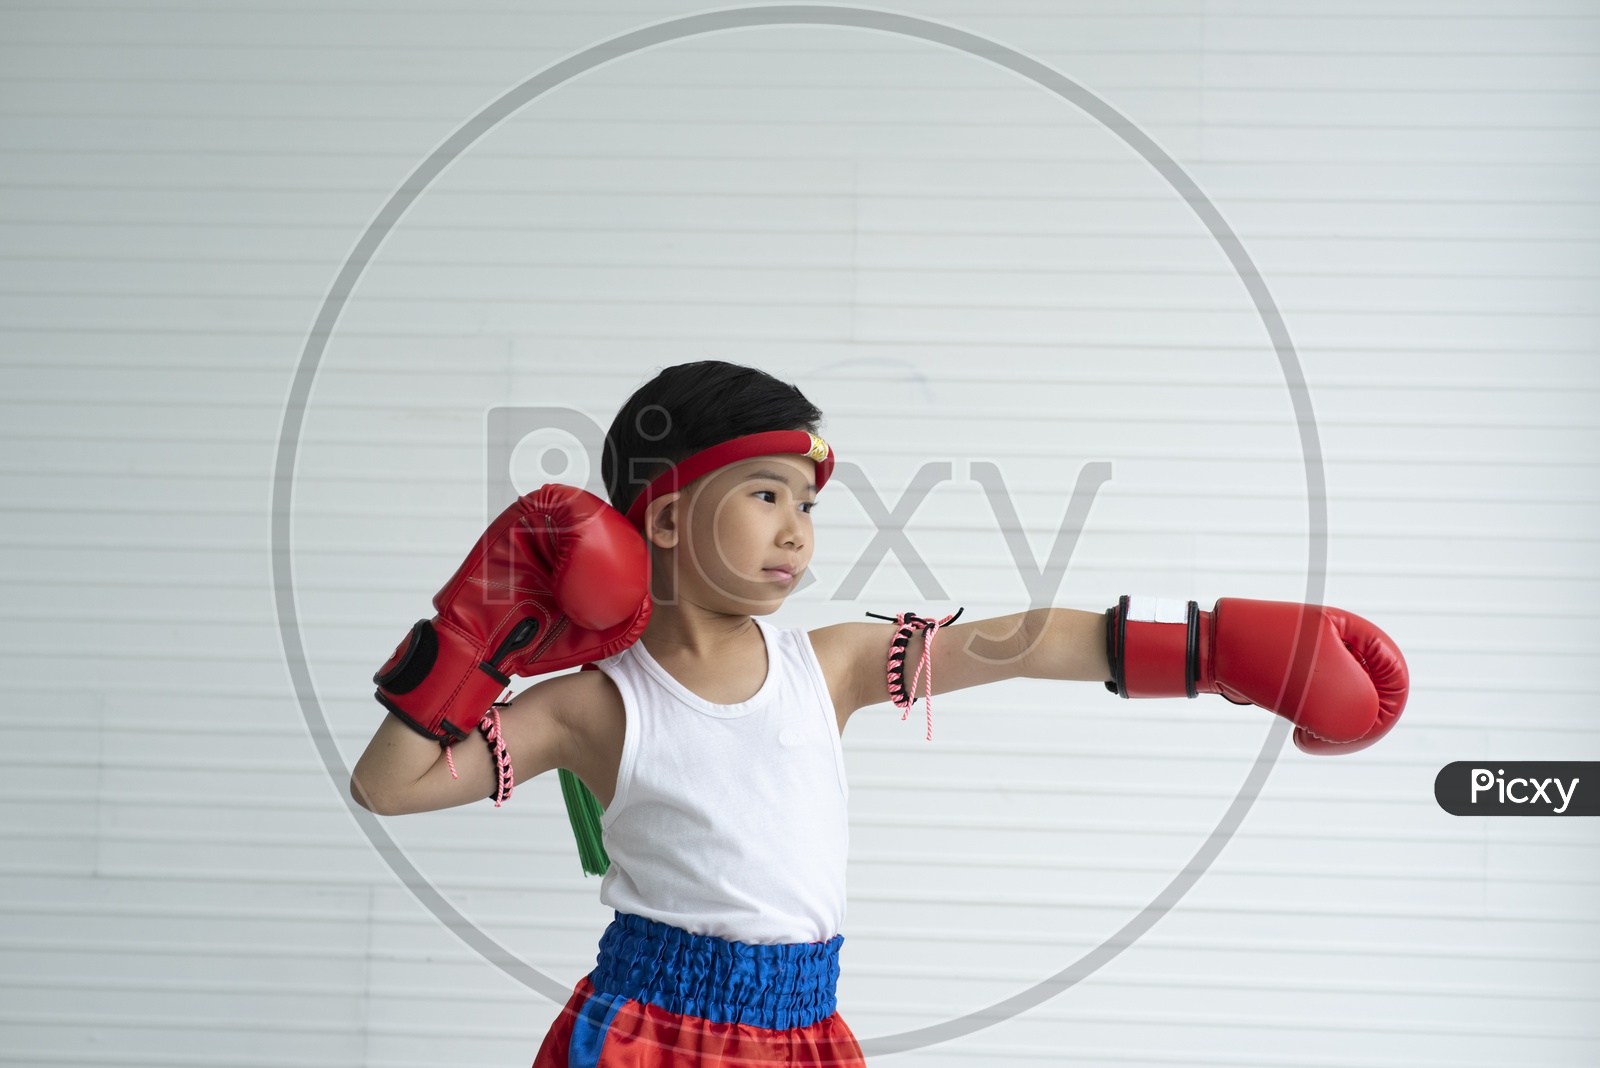 A Thai child learning boxing